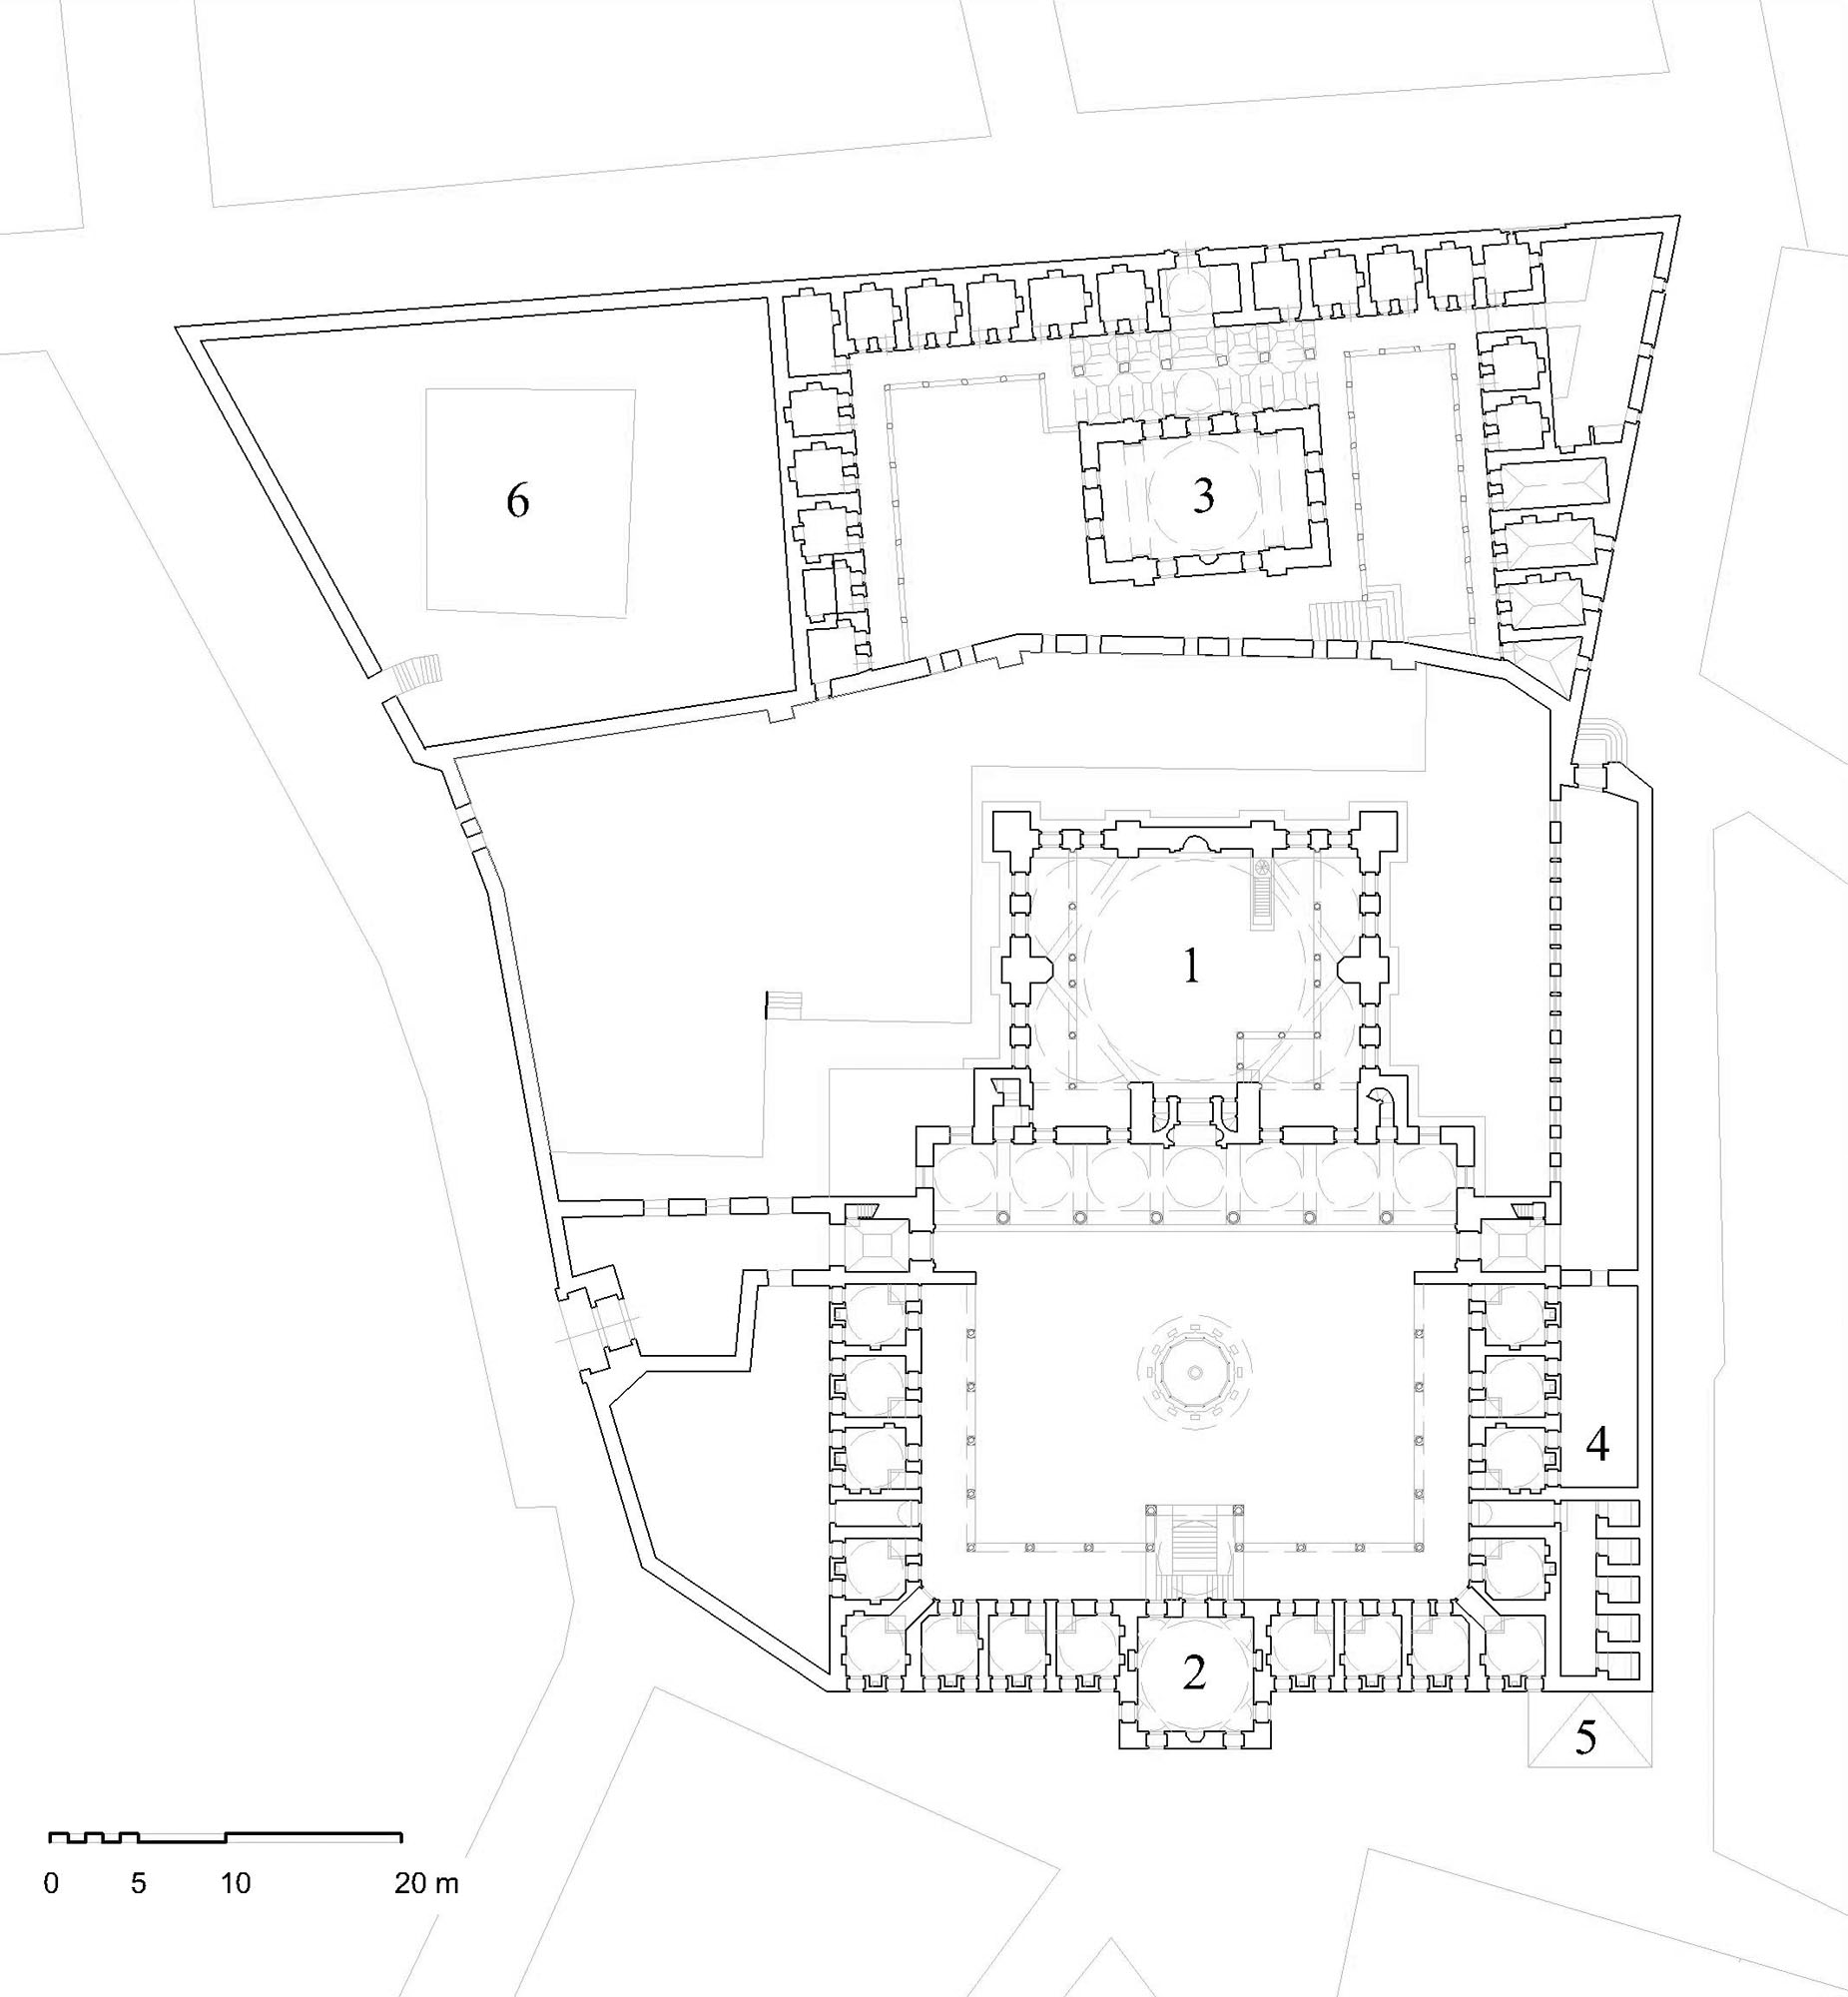 Floor plan of complex showing (1) mosque, (2) madrasa, (3) convent, (4) latrines, (5) reservoir with street fountains, (6) pre-existing masjid of Helvacibasi Iskender